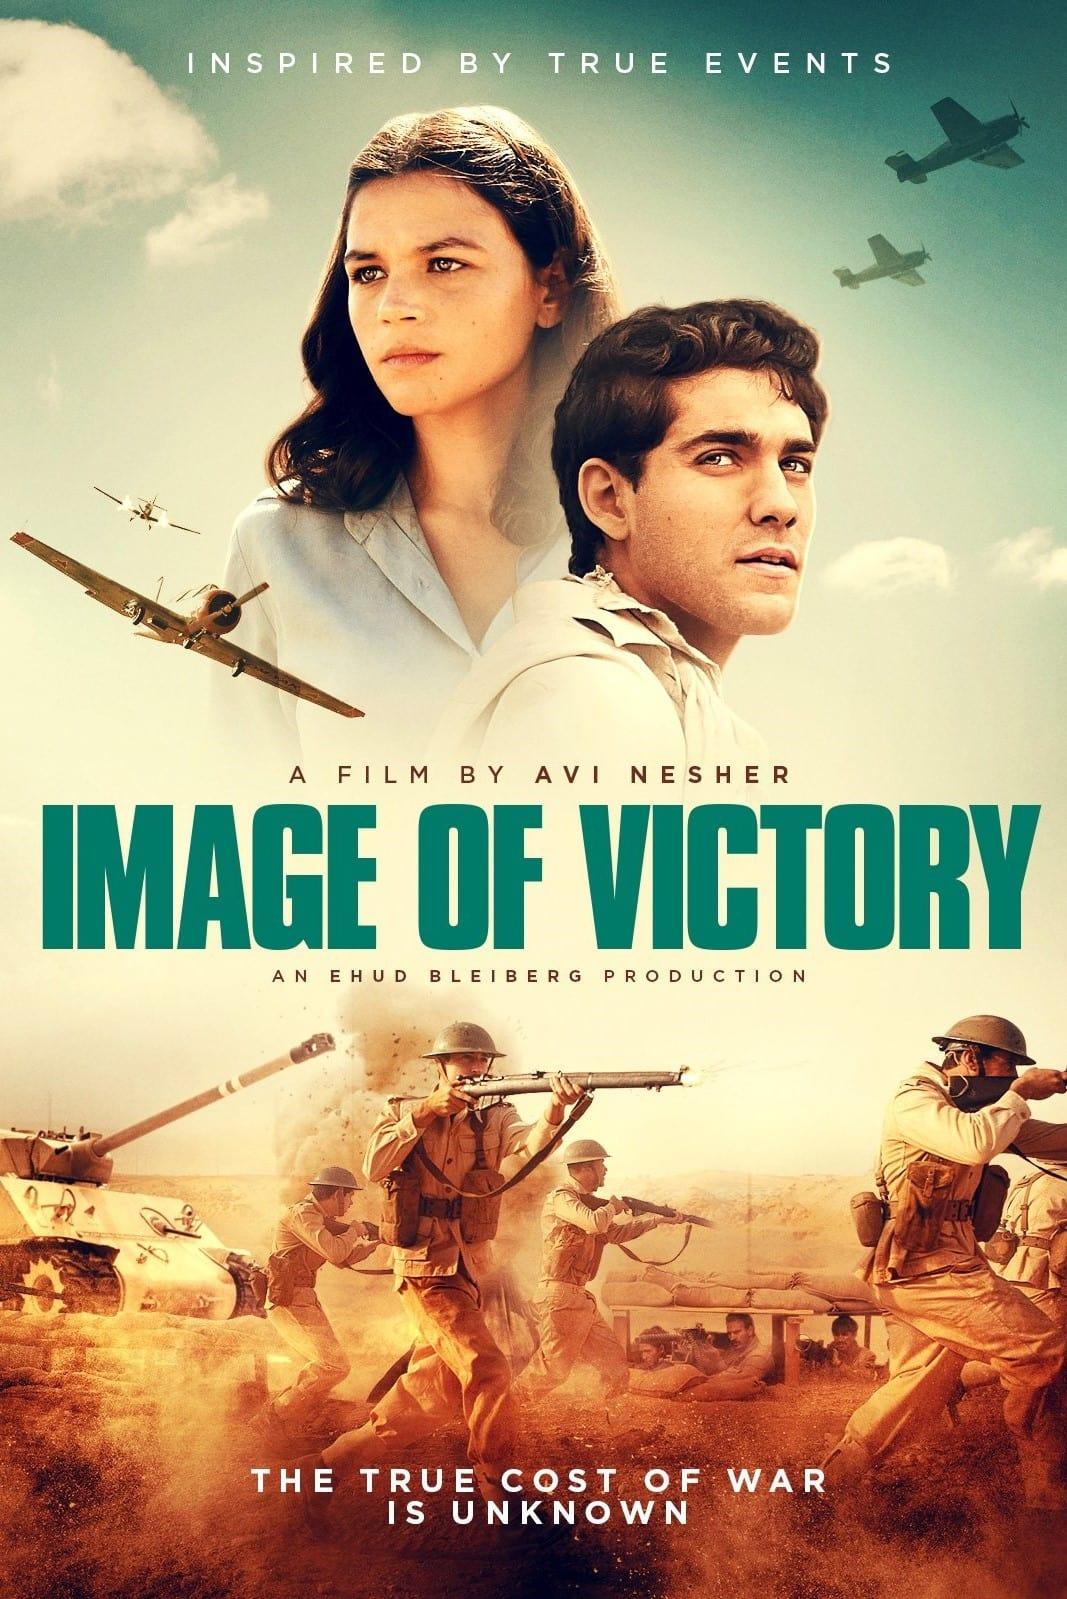 Image of Victory poster